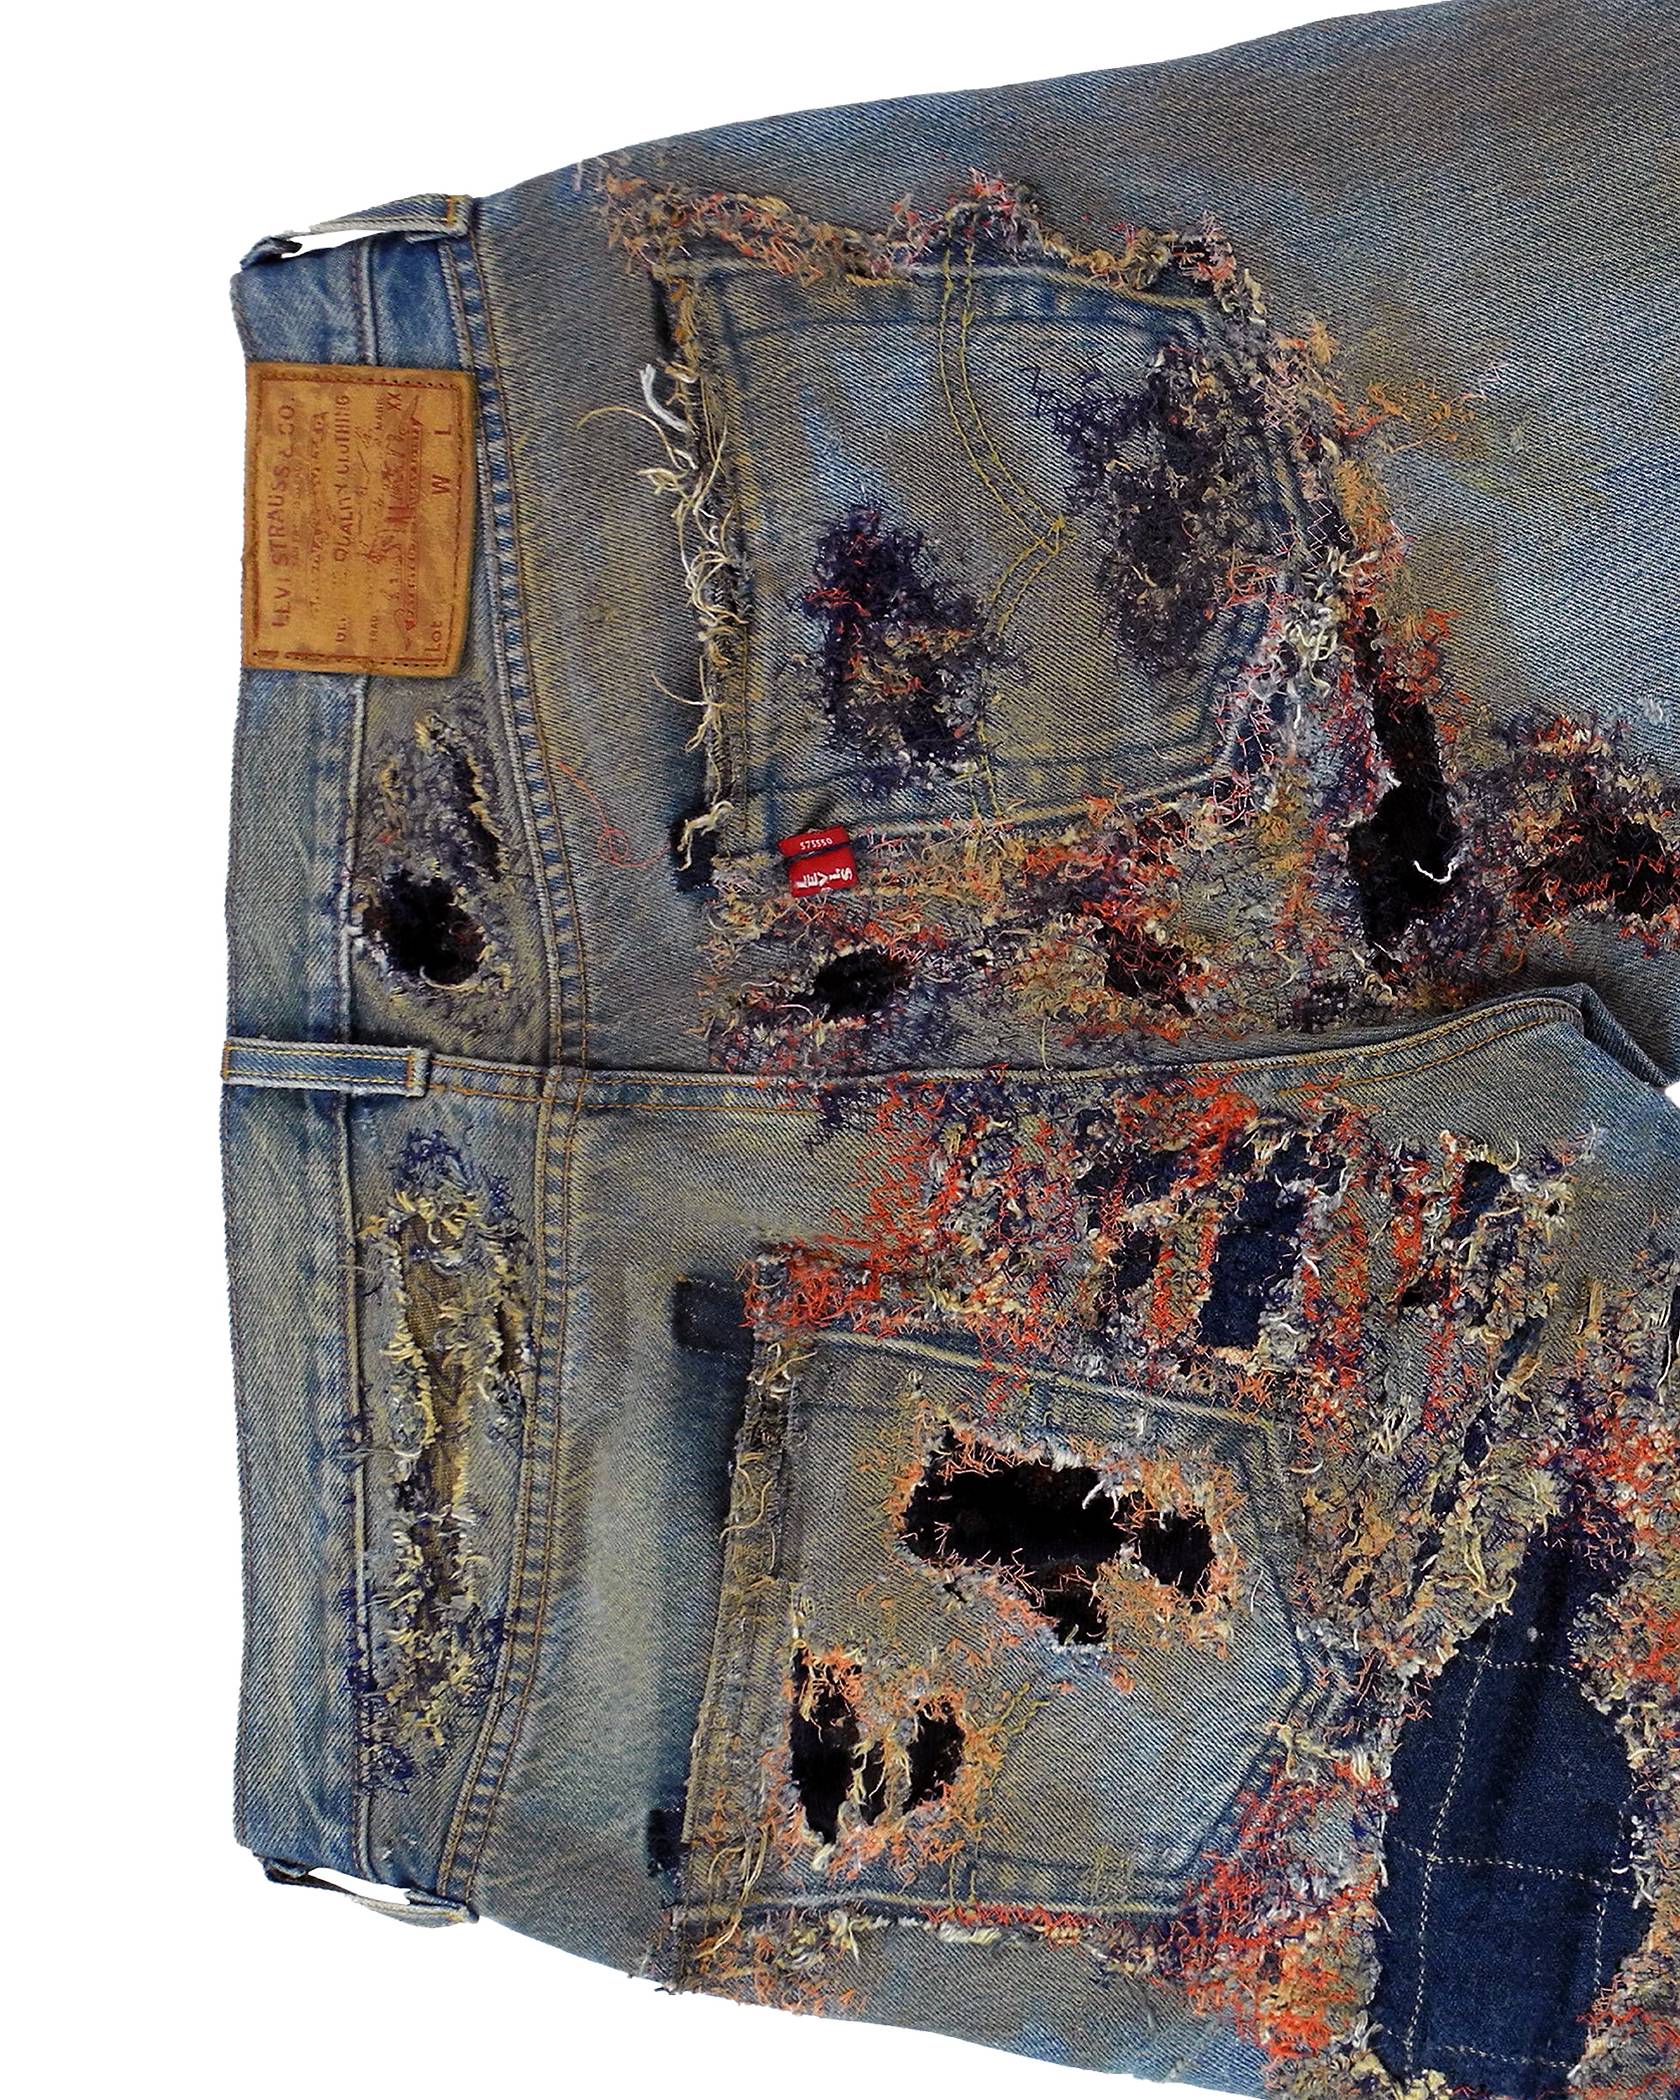 Phillip Leyesa close-up on the backside waistline and back pockets with Levis brand patch and red tab logo still on the Levi's 501 Jeans after his customization process showing detailed distressed effect.